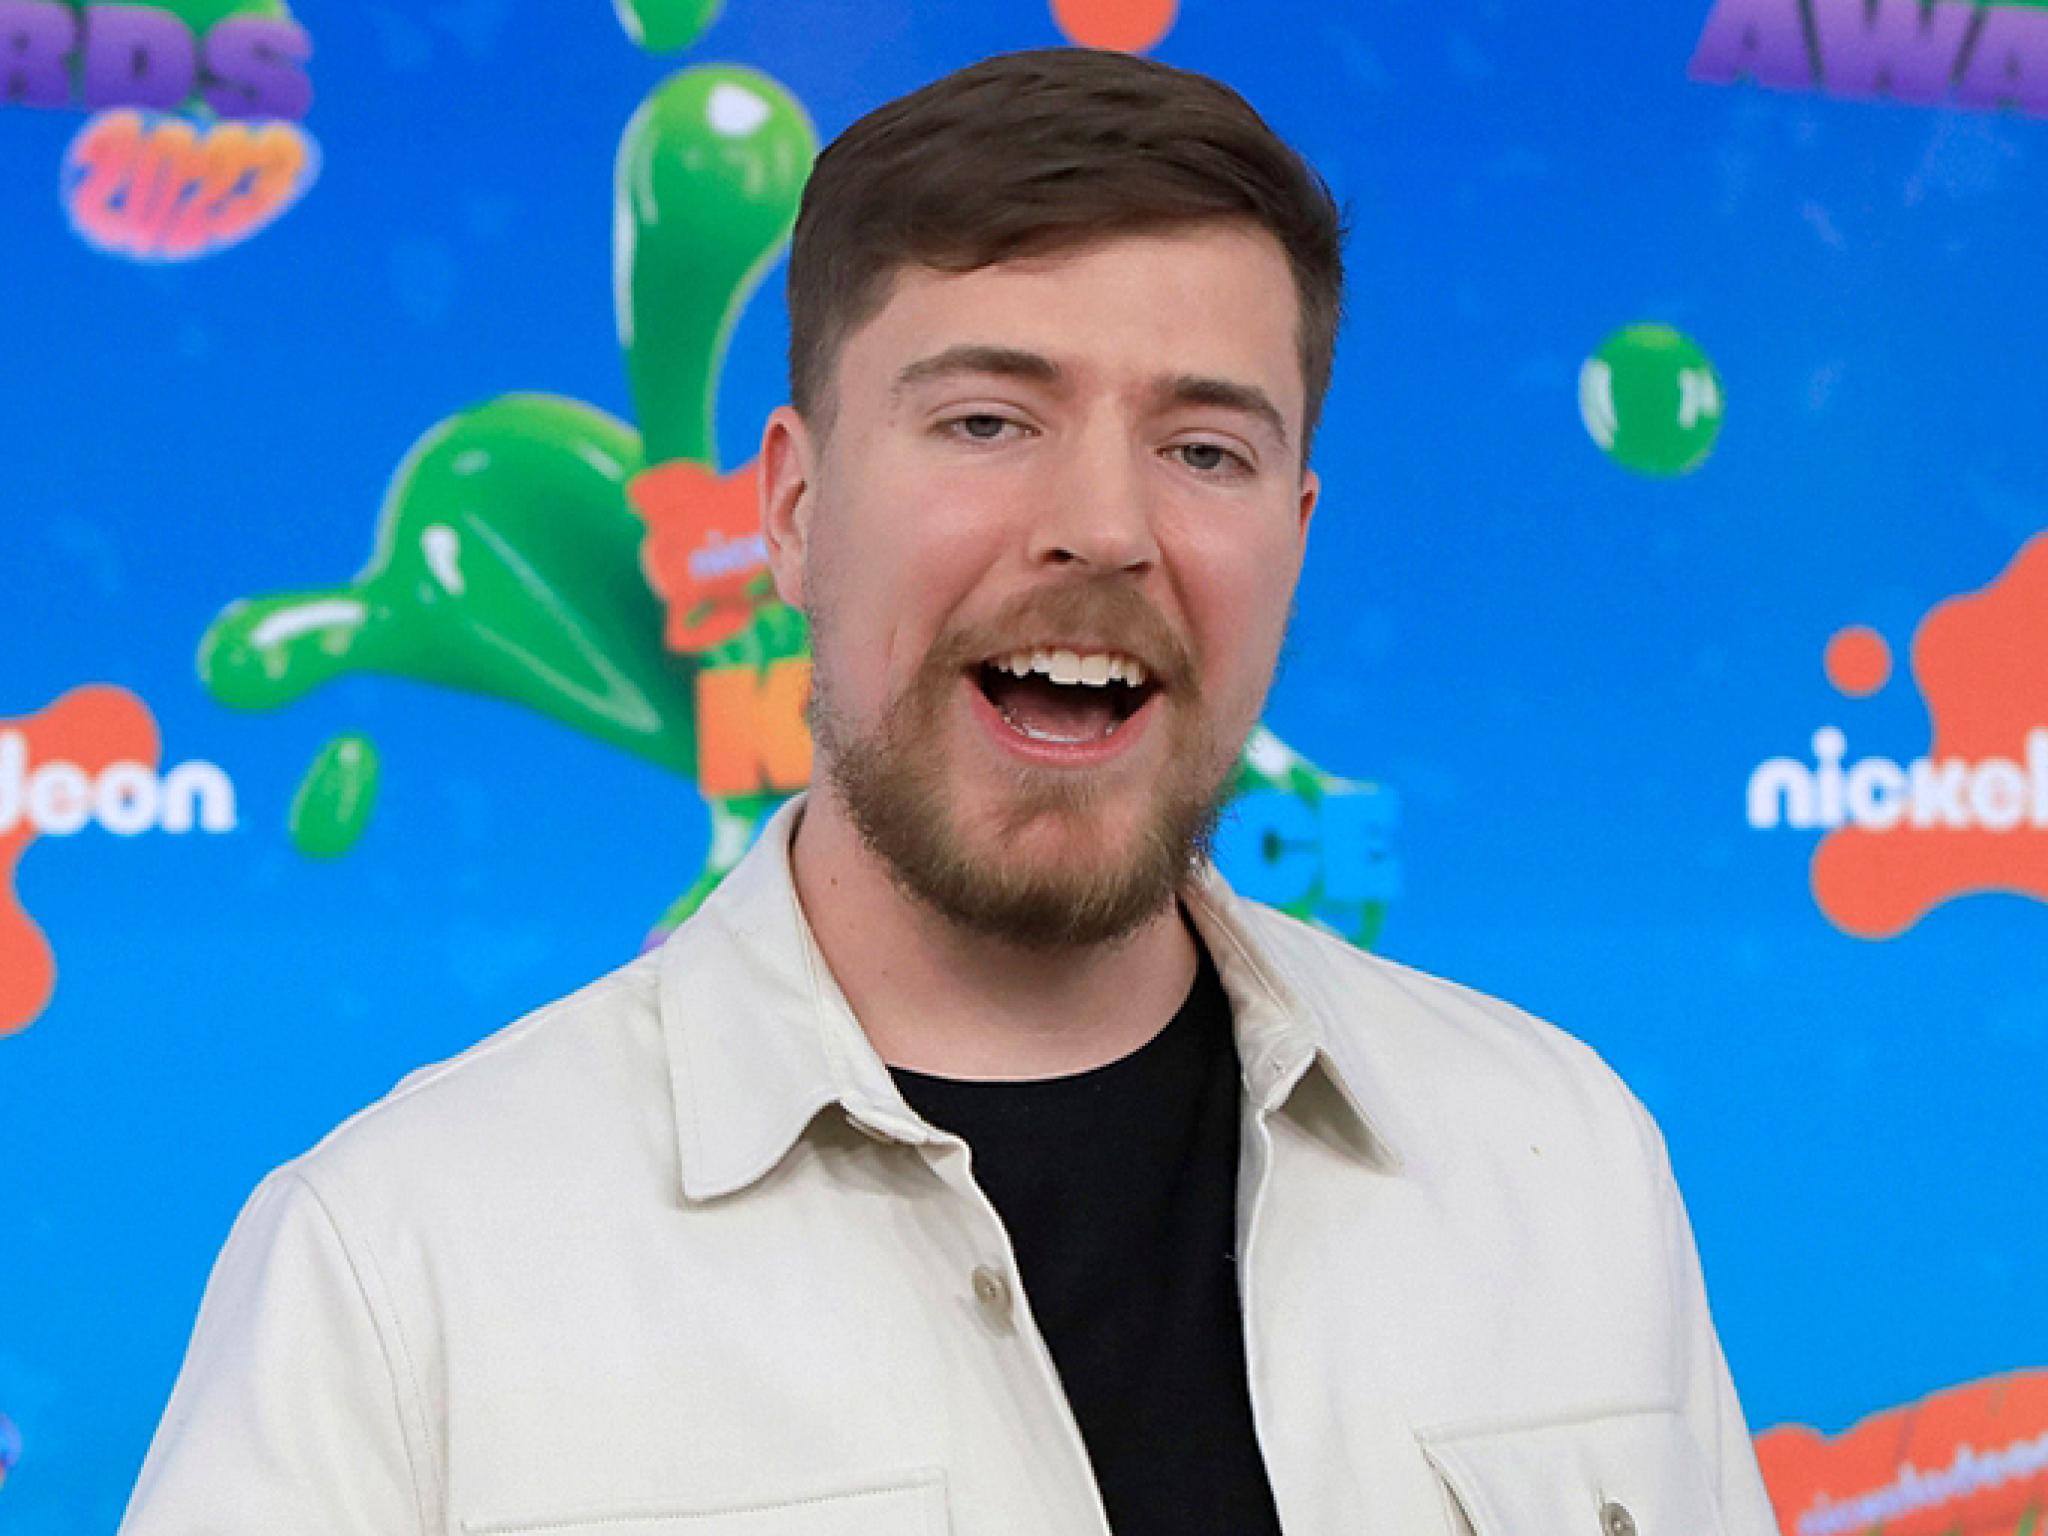  mrbeast-celebrates-youtube-record-with-new-video-featuring-50-content-creators-competing-for-1m 